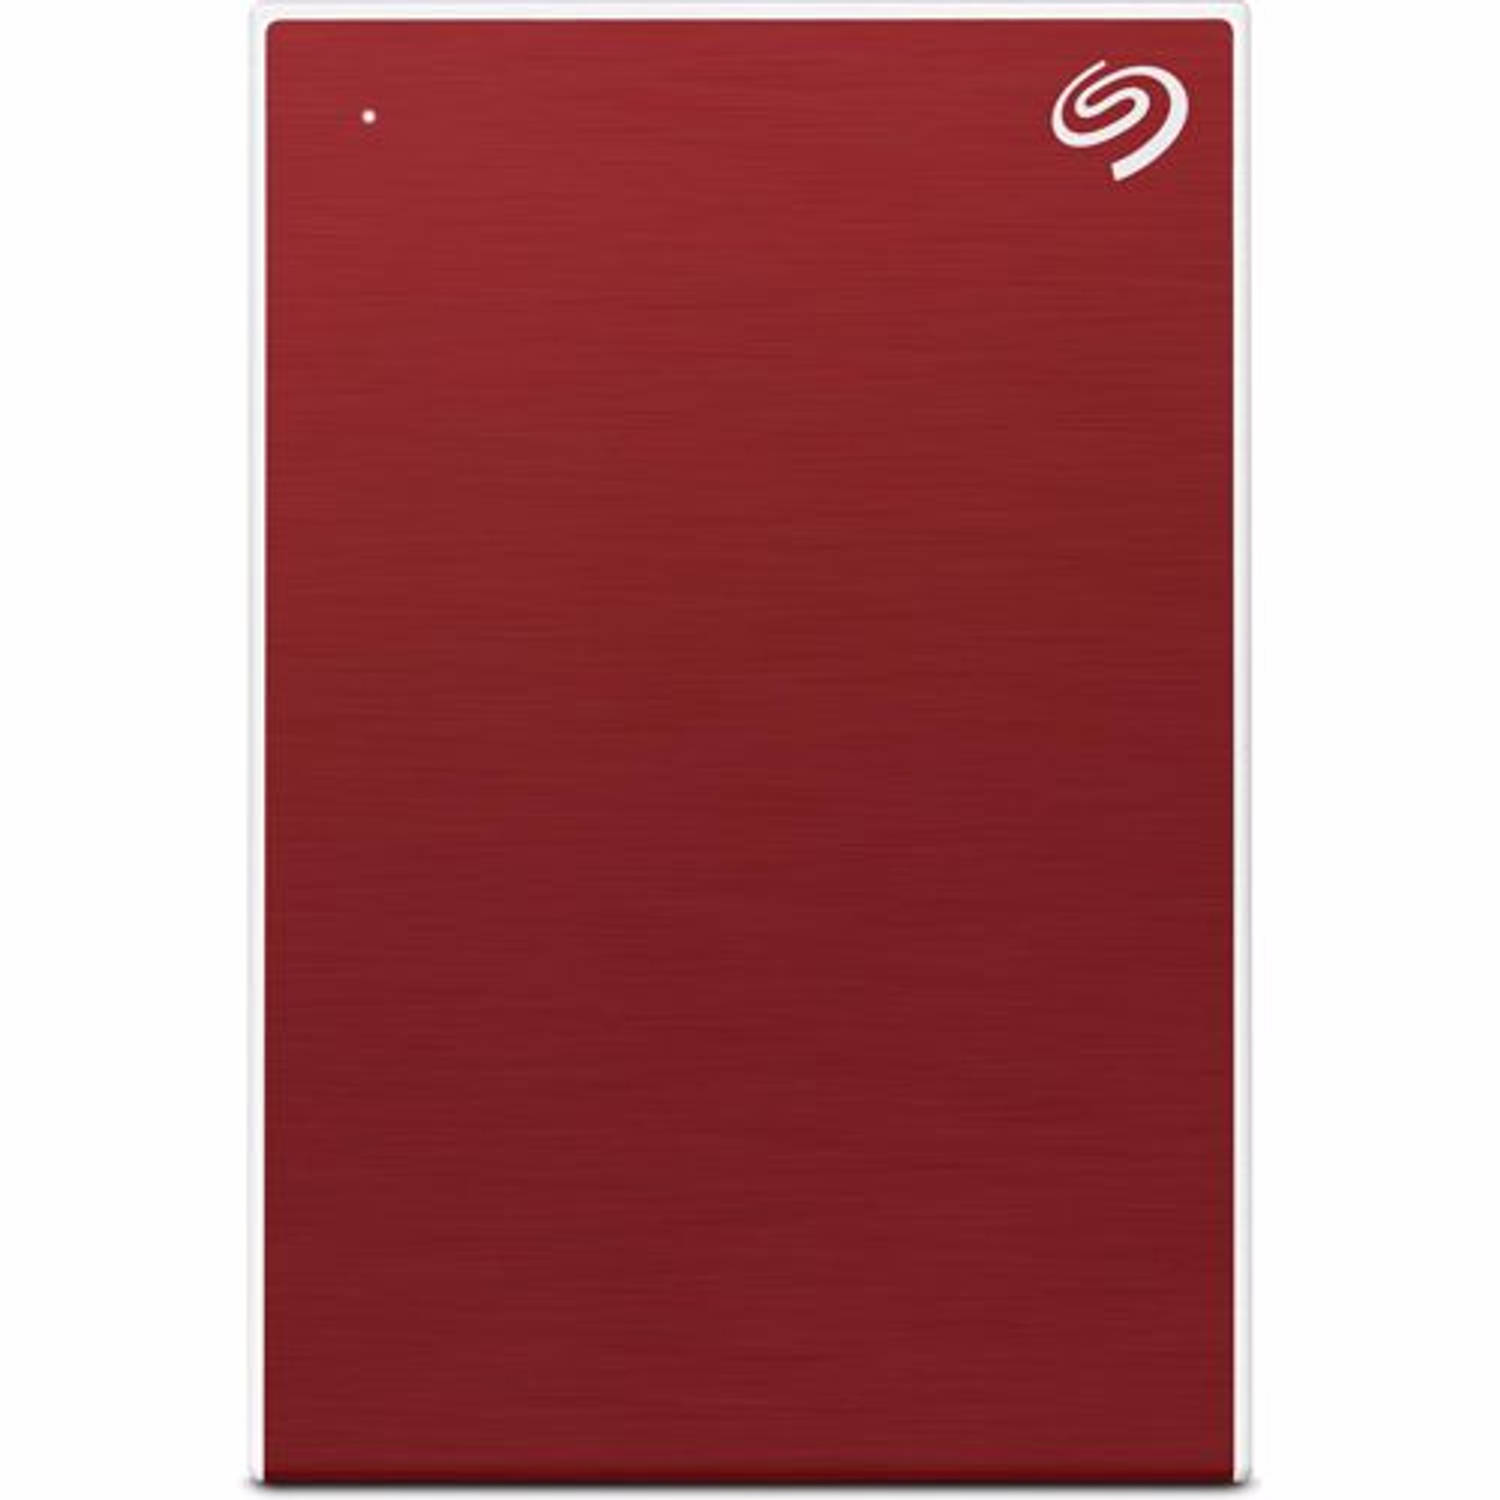 Seagate One Touch Portable Drive 4 TB